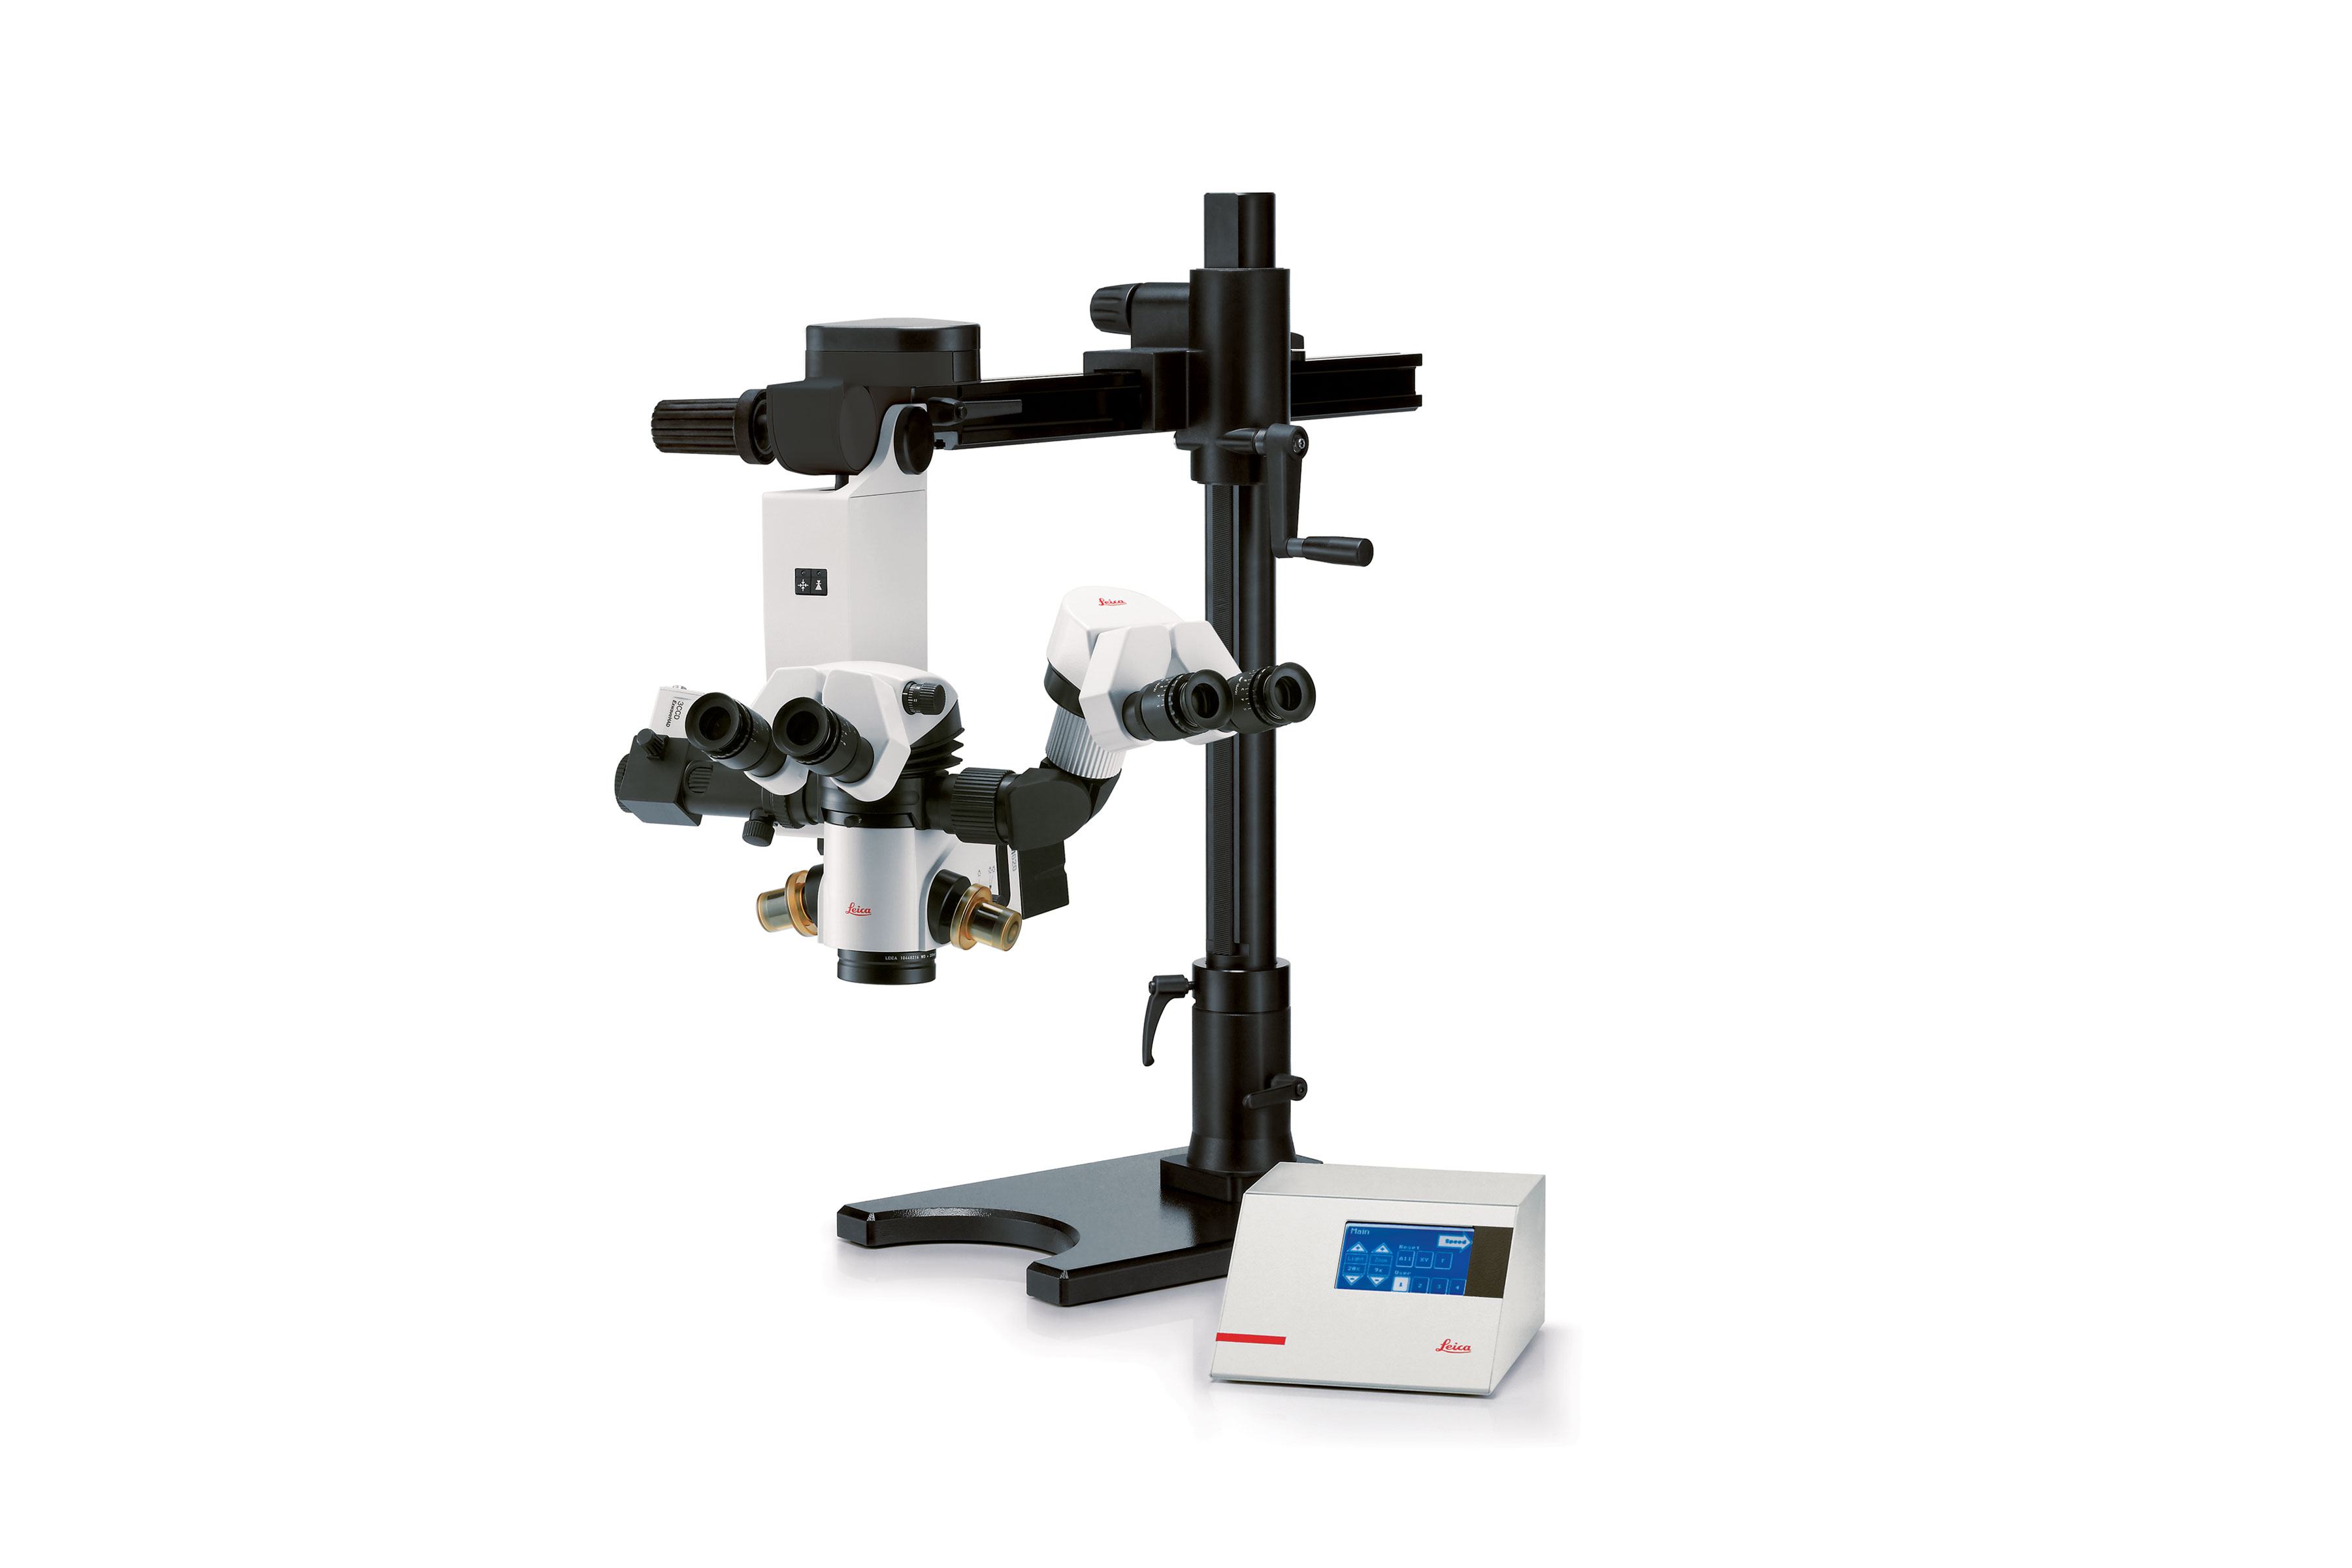 The Leica M620 TTS tabletop surgical microscope for ophthalmology.